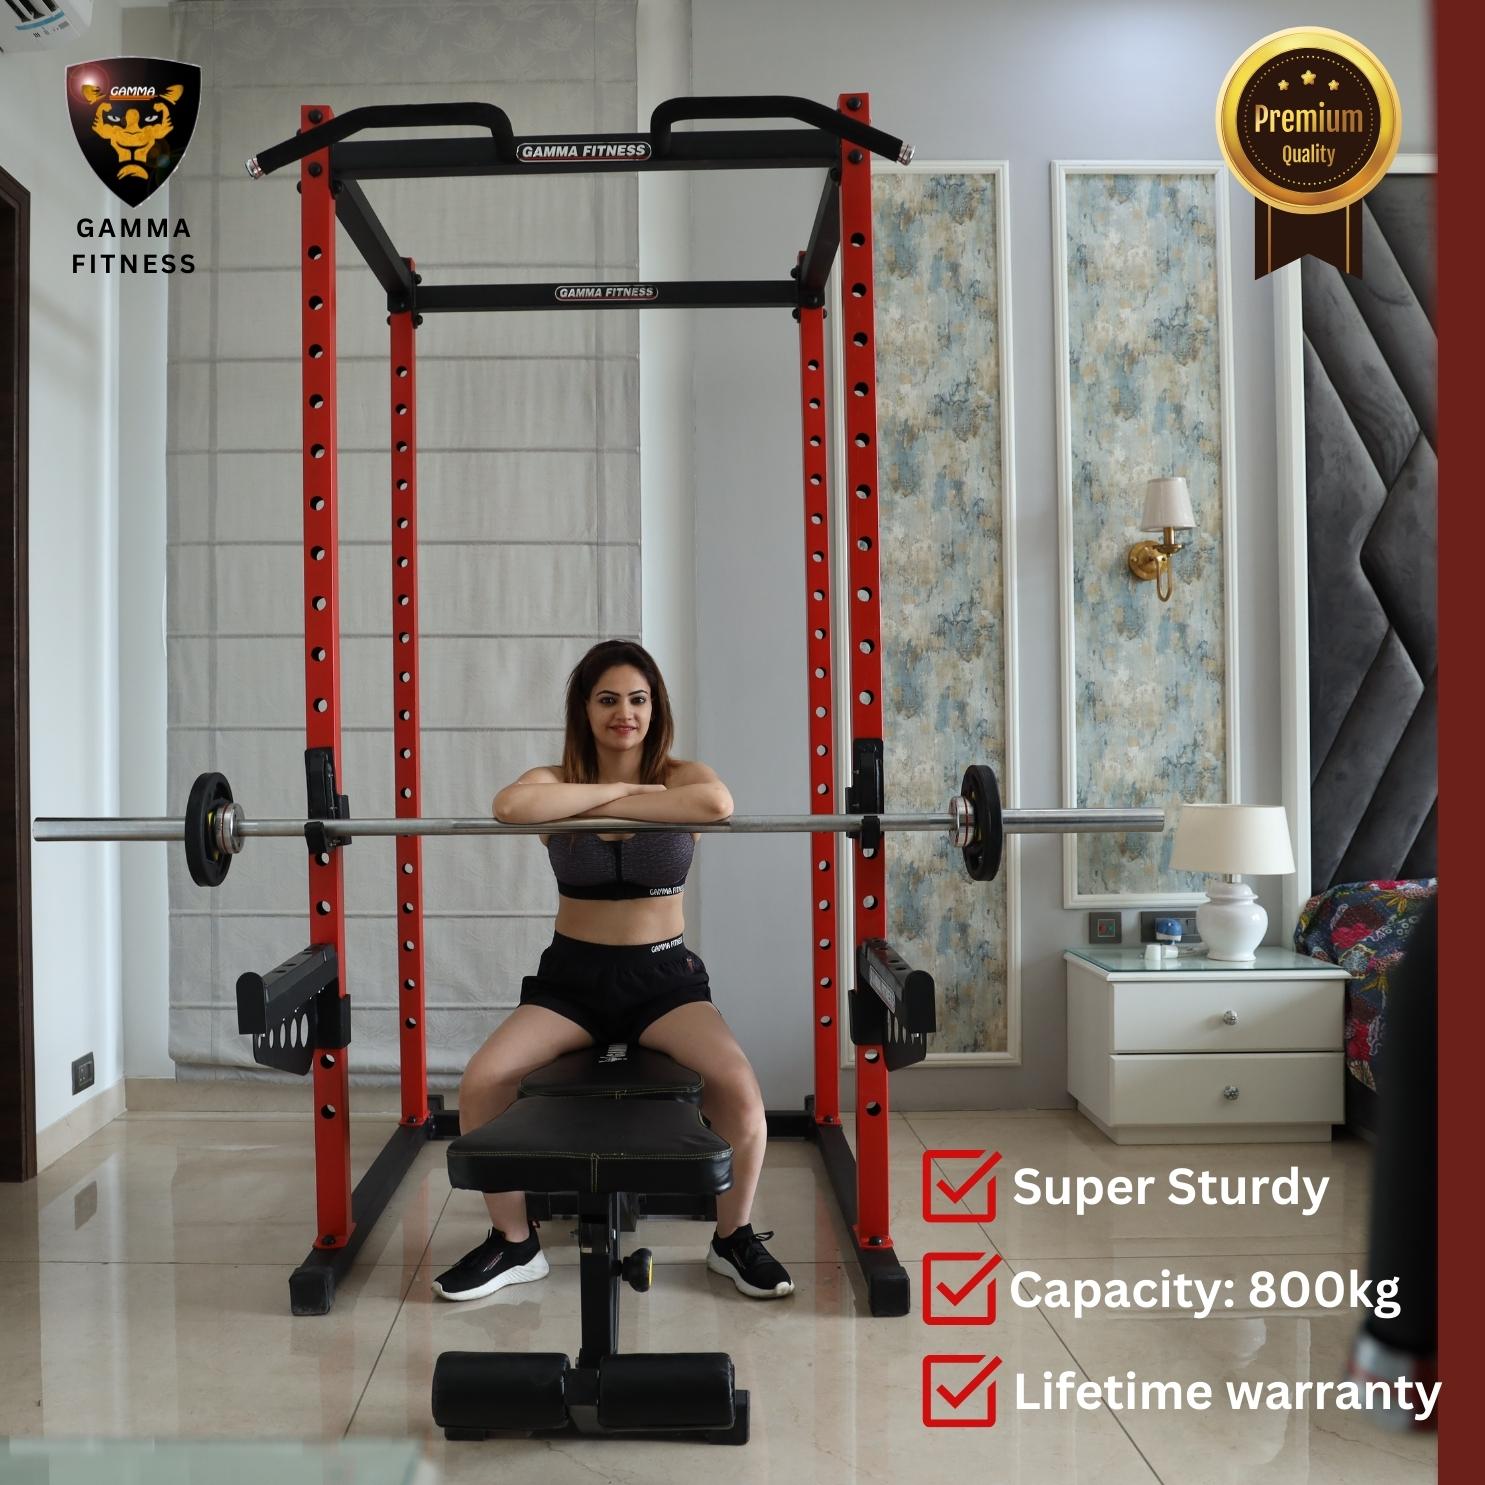 Power Squat Rack PR-04 Lx Commercial Made With Latest Laser Cut Technology For Commercial Gym or Home Gym Setup